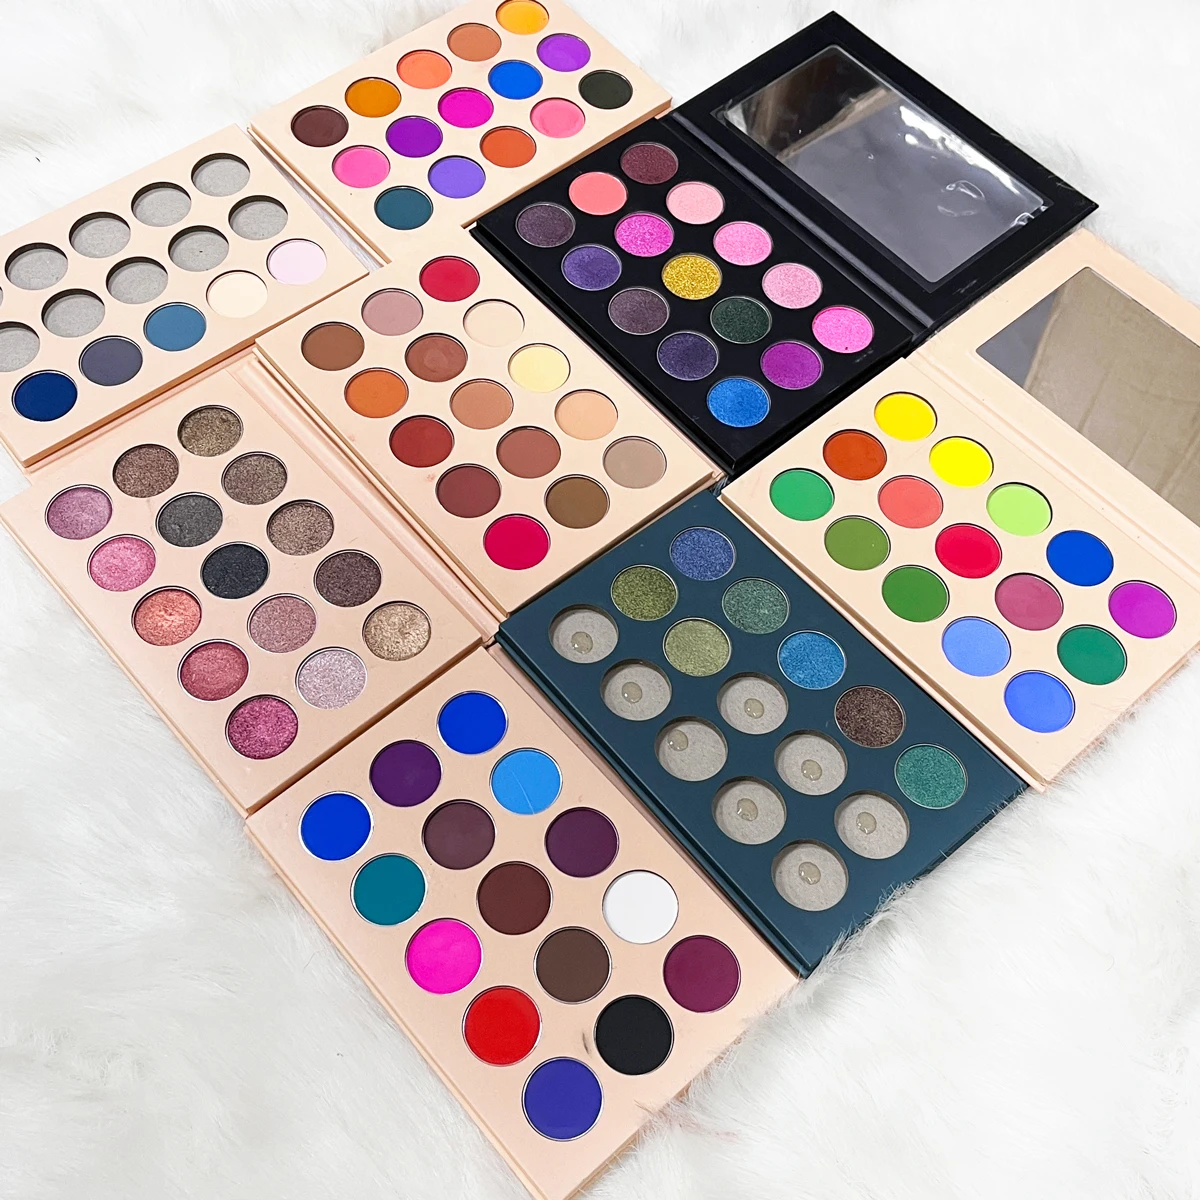 

Wholesale customize makeup eyeshadow vegan highly pigmented matte shimmer 26mm pans eye shadow palette private label